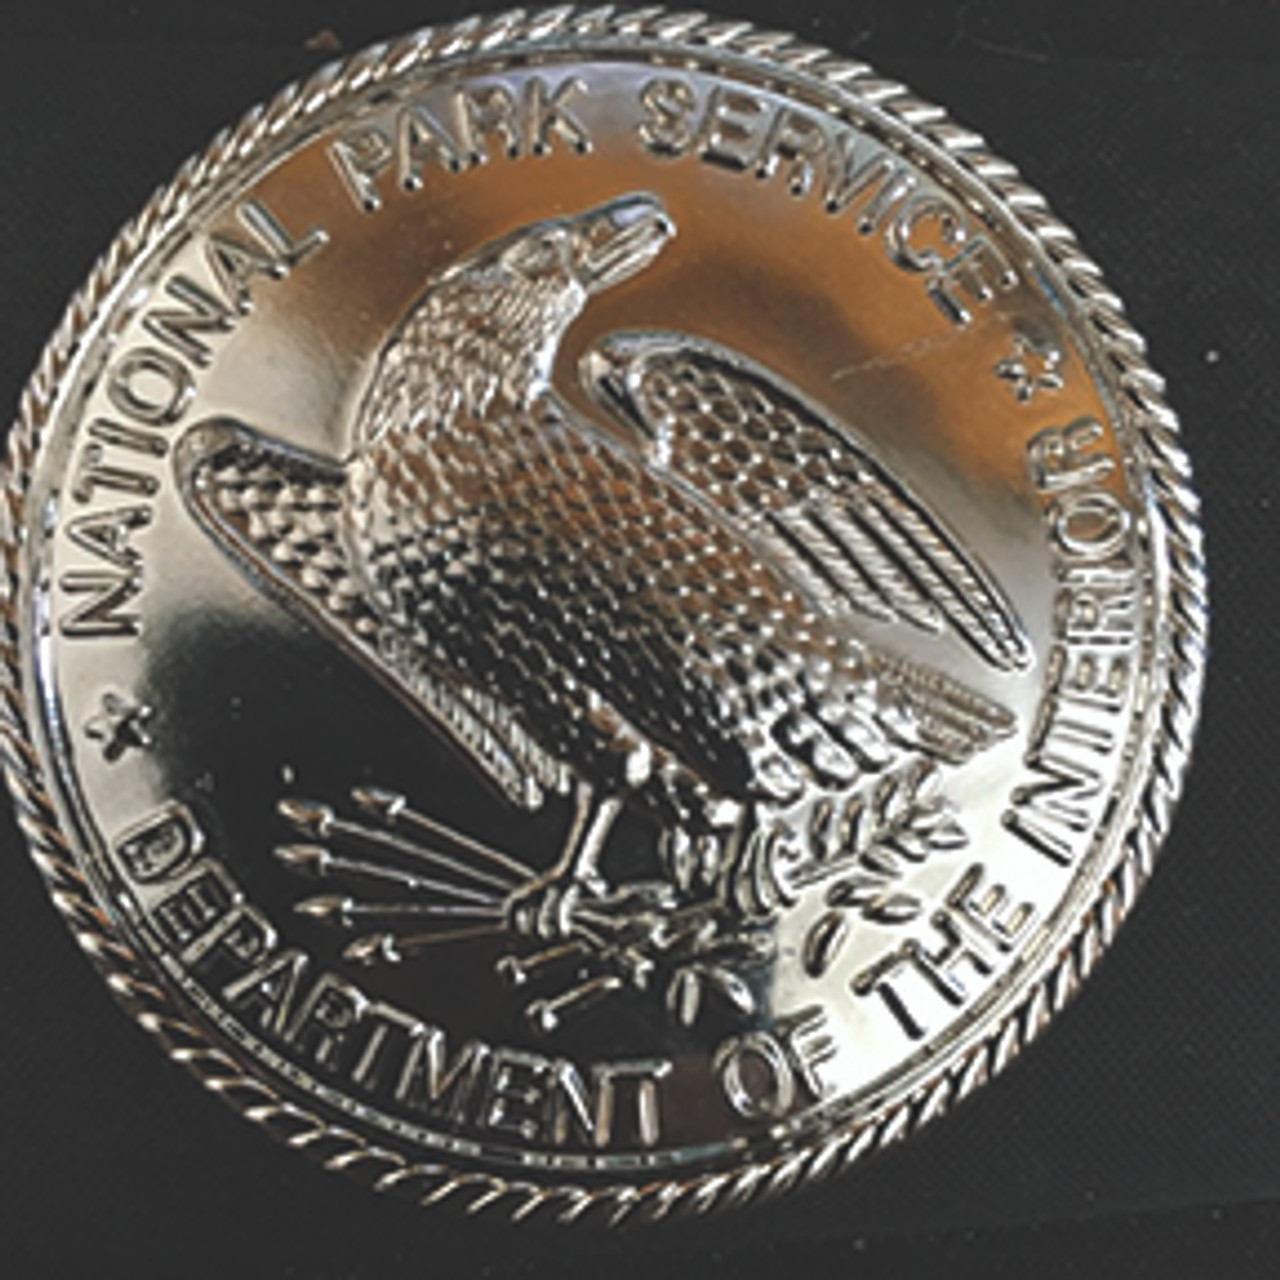 National Park Service 1905-1920 Replica Badge (Discontinued)